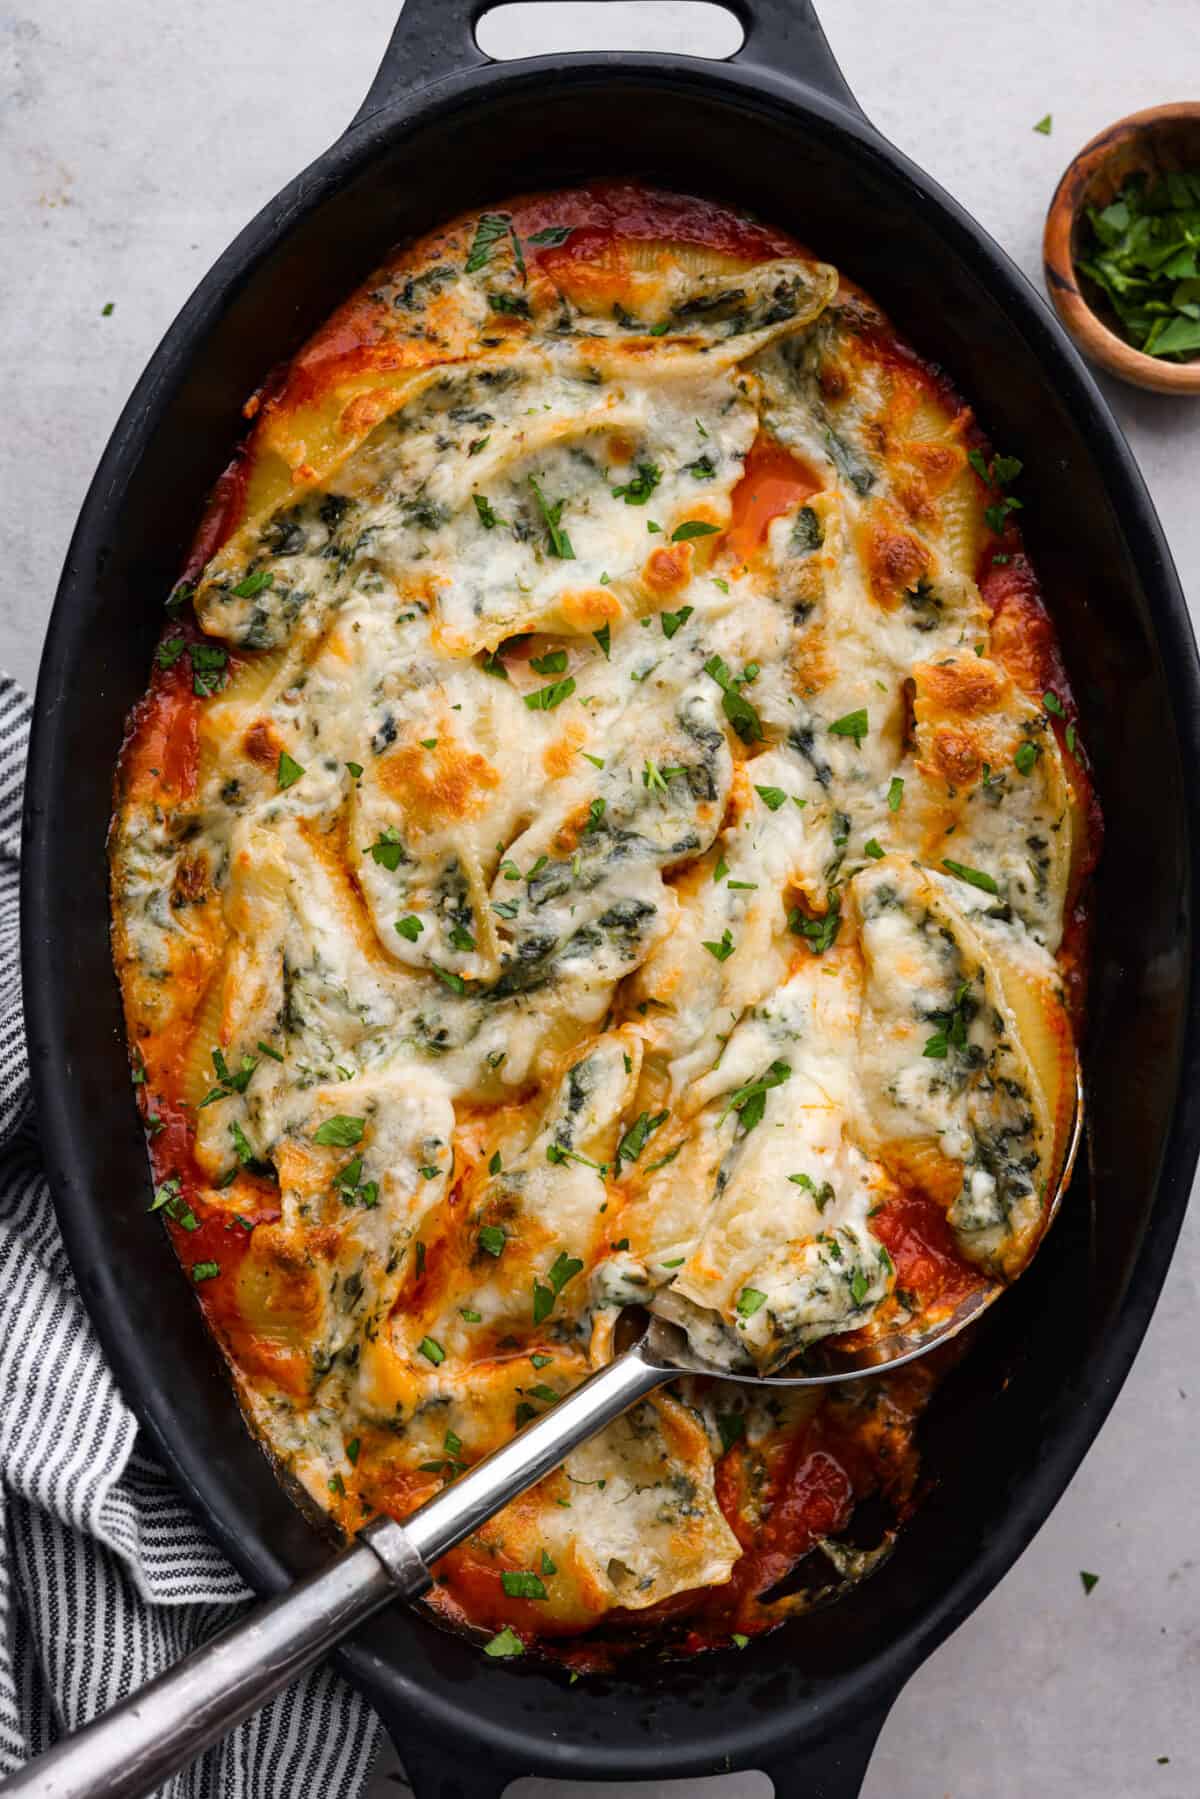 Top-down view of baked, stuffed shells in a black casserole dish.